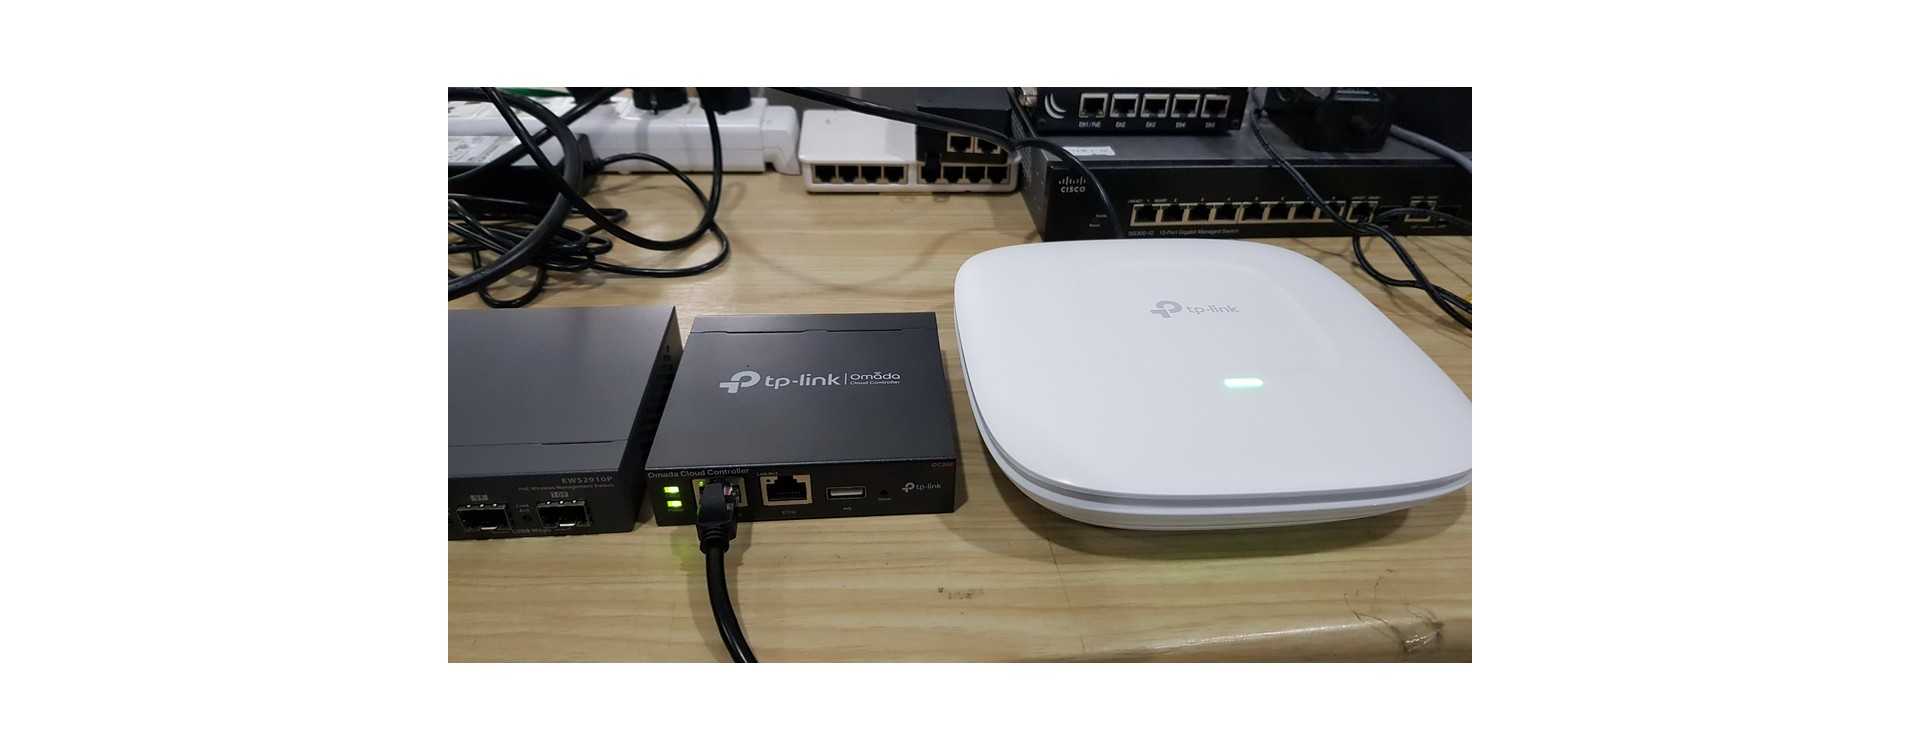 Review TP-Link OC200 Cloud Controller รองรับ Facebook Check-In